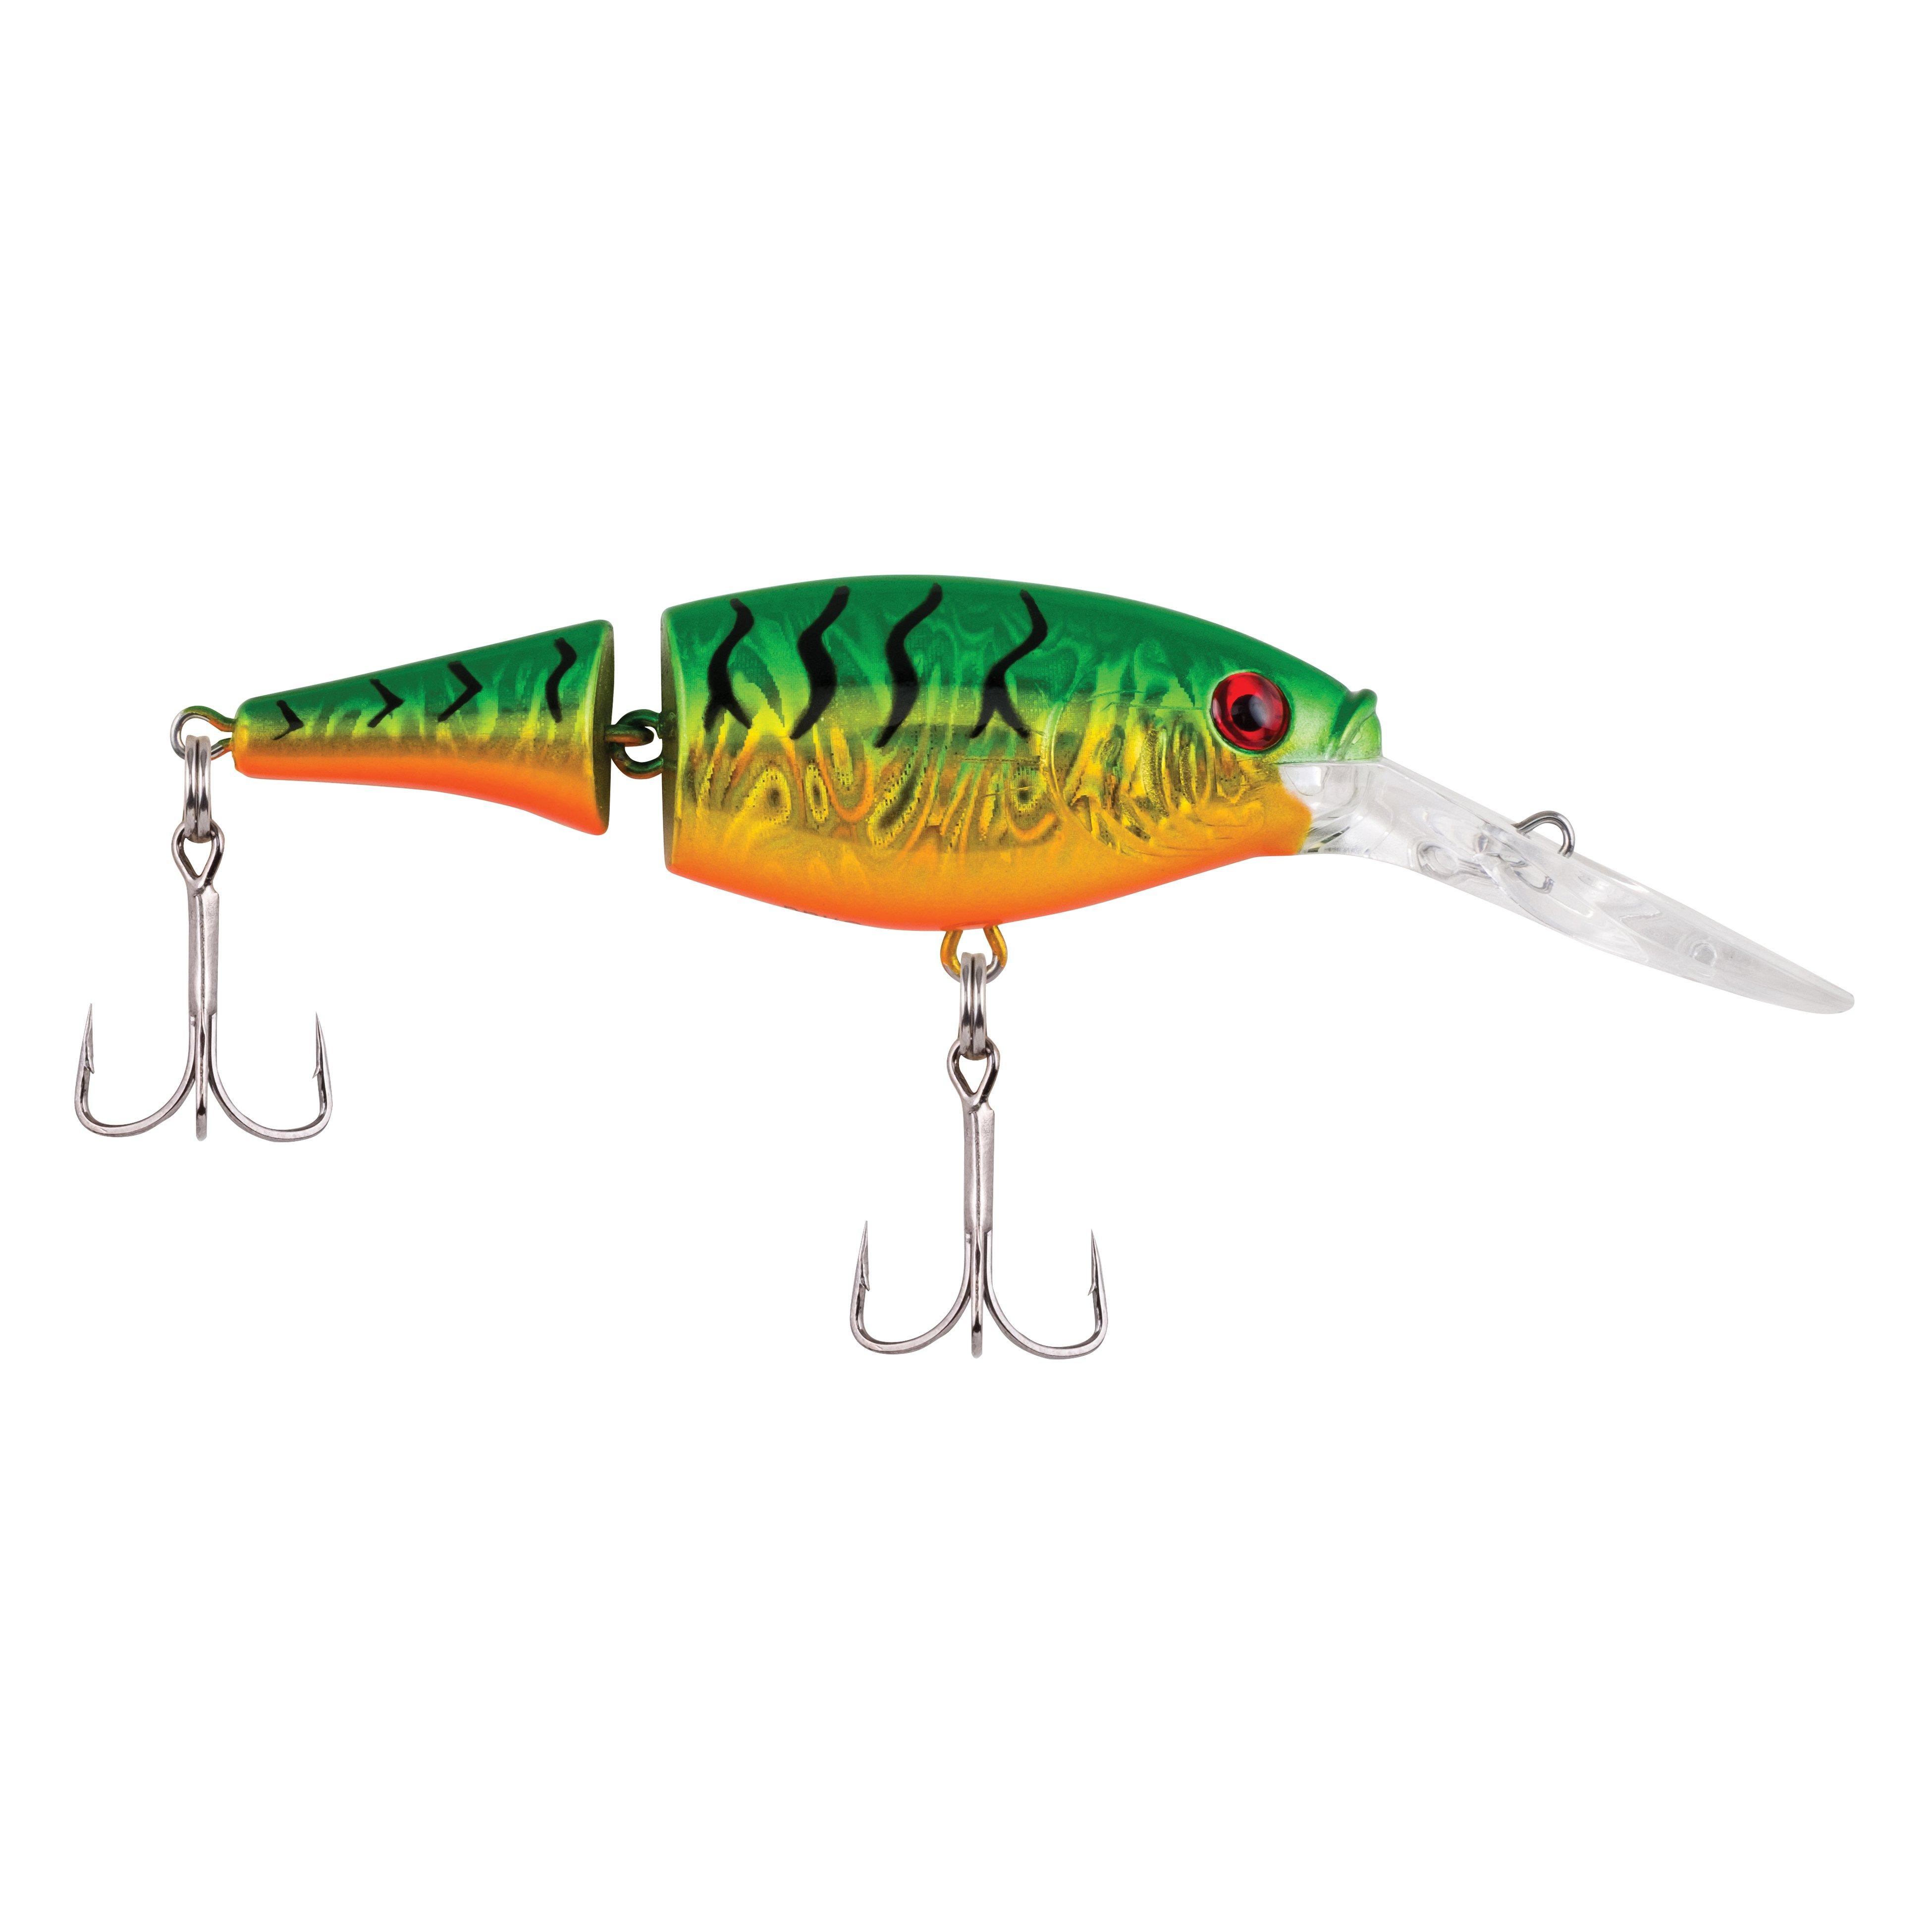 Flicker Shad 5 Jointed Slick Purple Bengal 5'-7' - Zone Chasse et Pêche /  Ecotone Val-d'Or